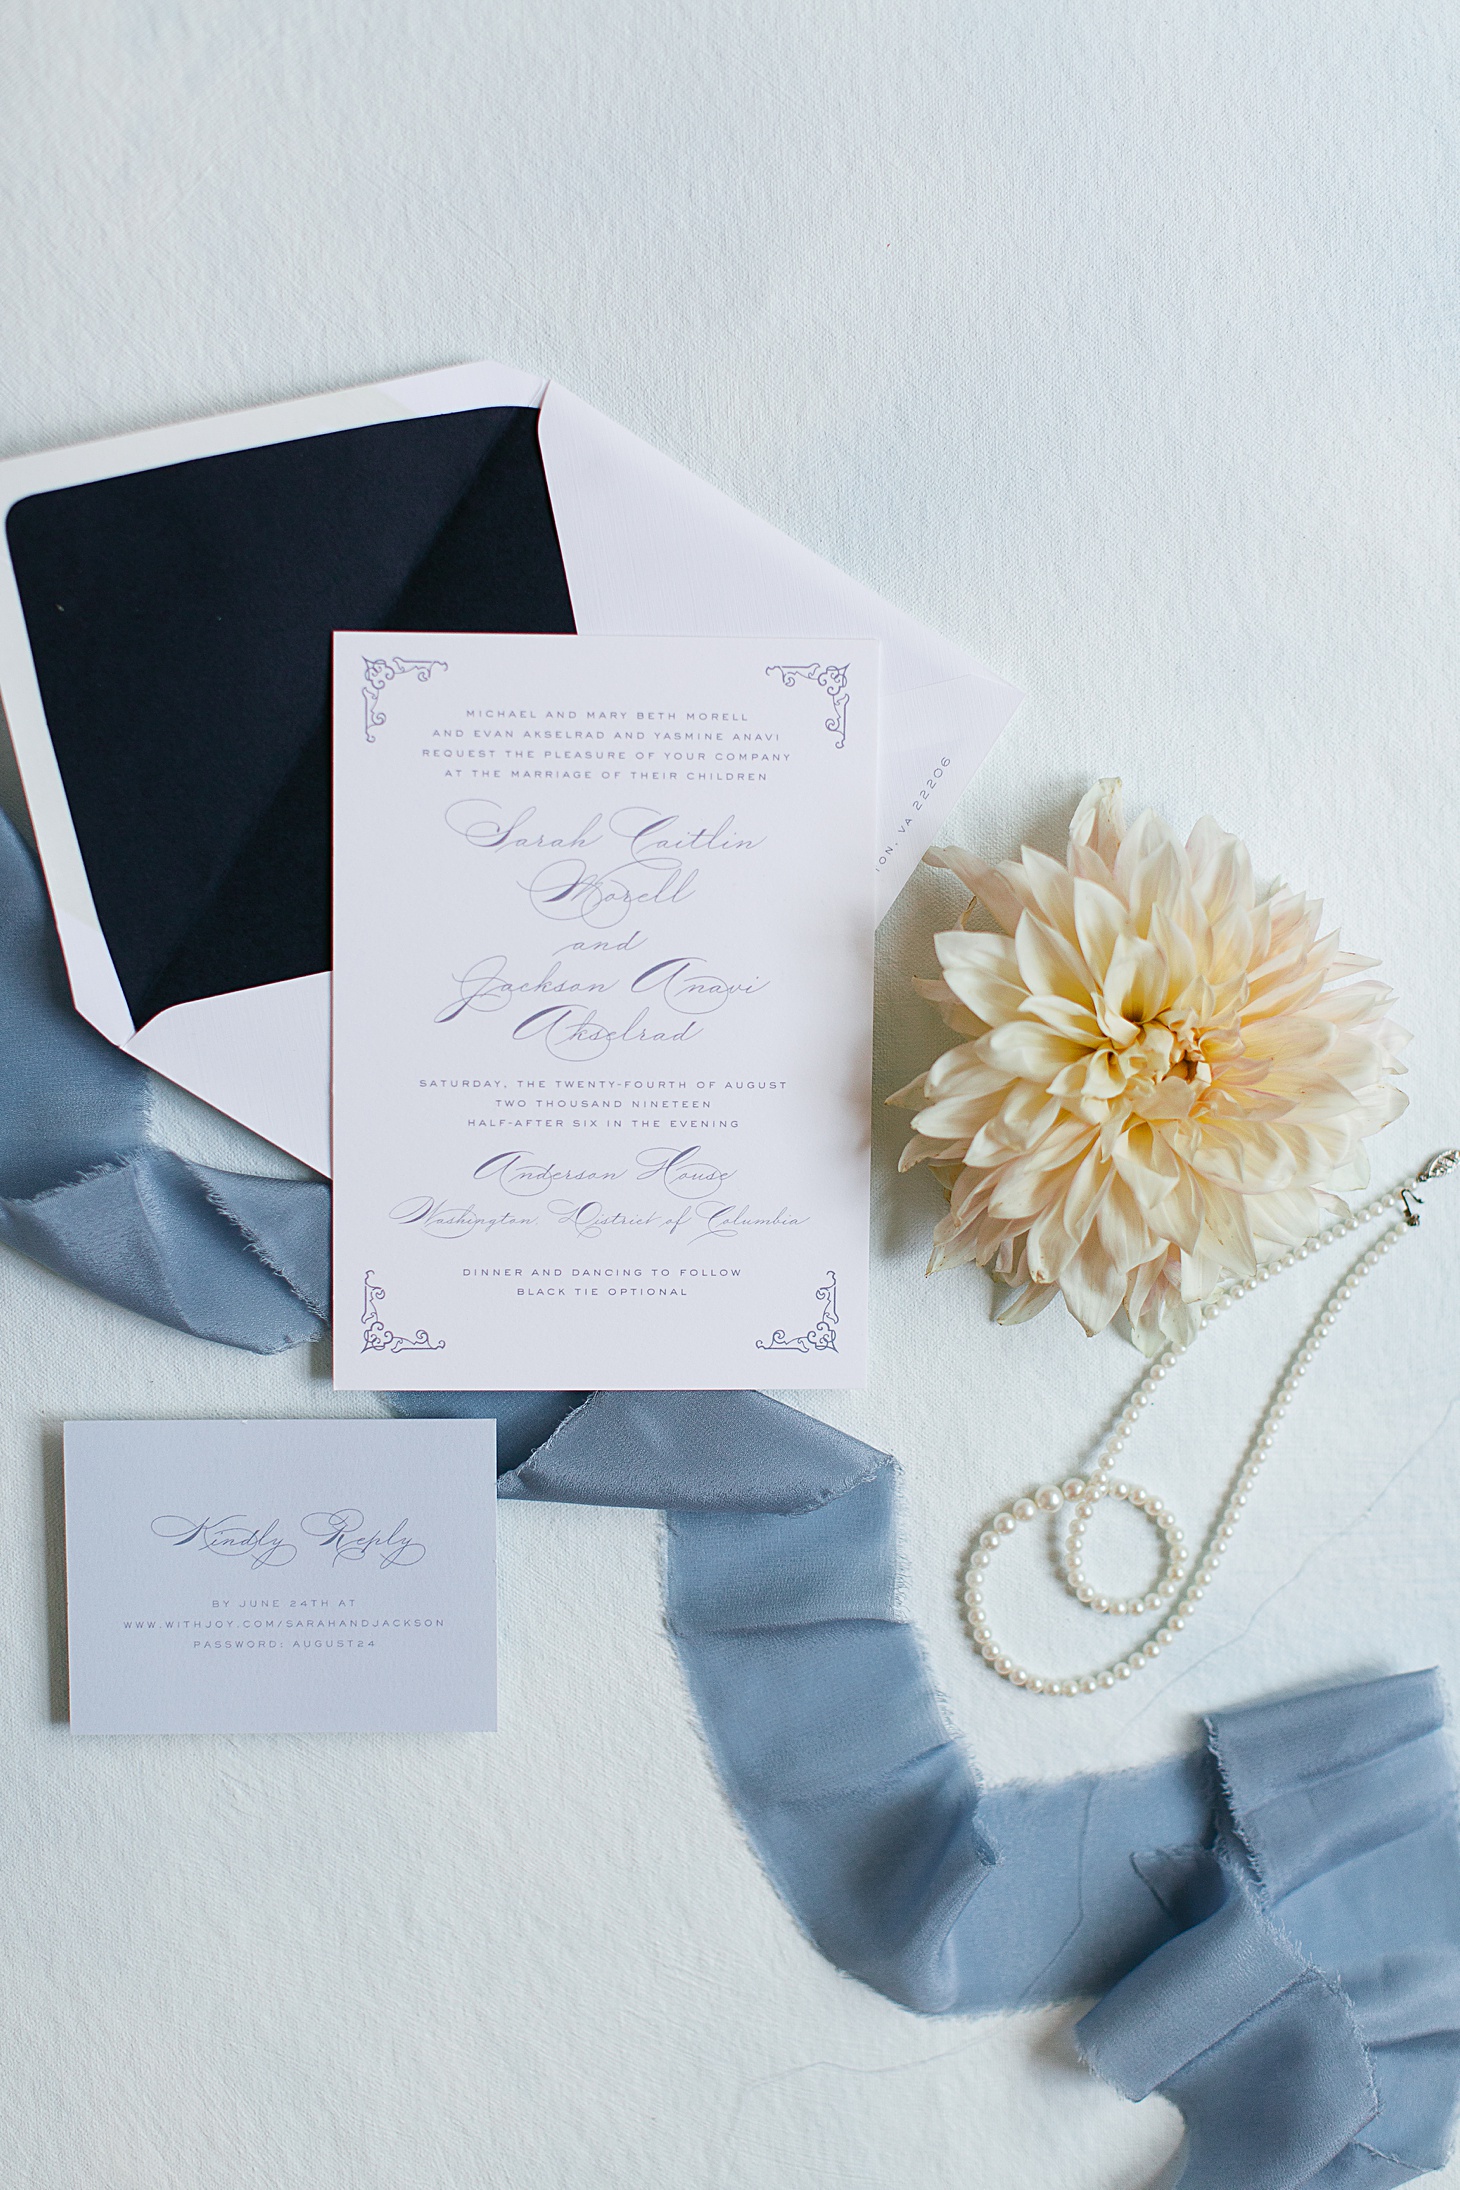 French inspired invitation Emily Baird Anderson House Wedding by Sarah Bradshaw